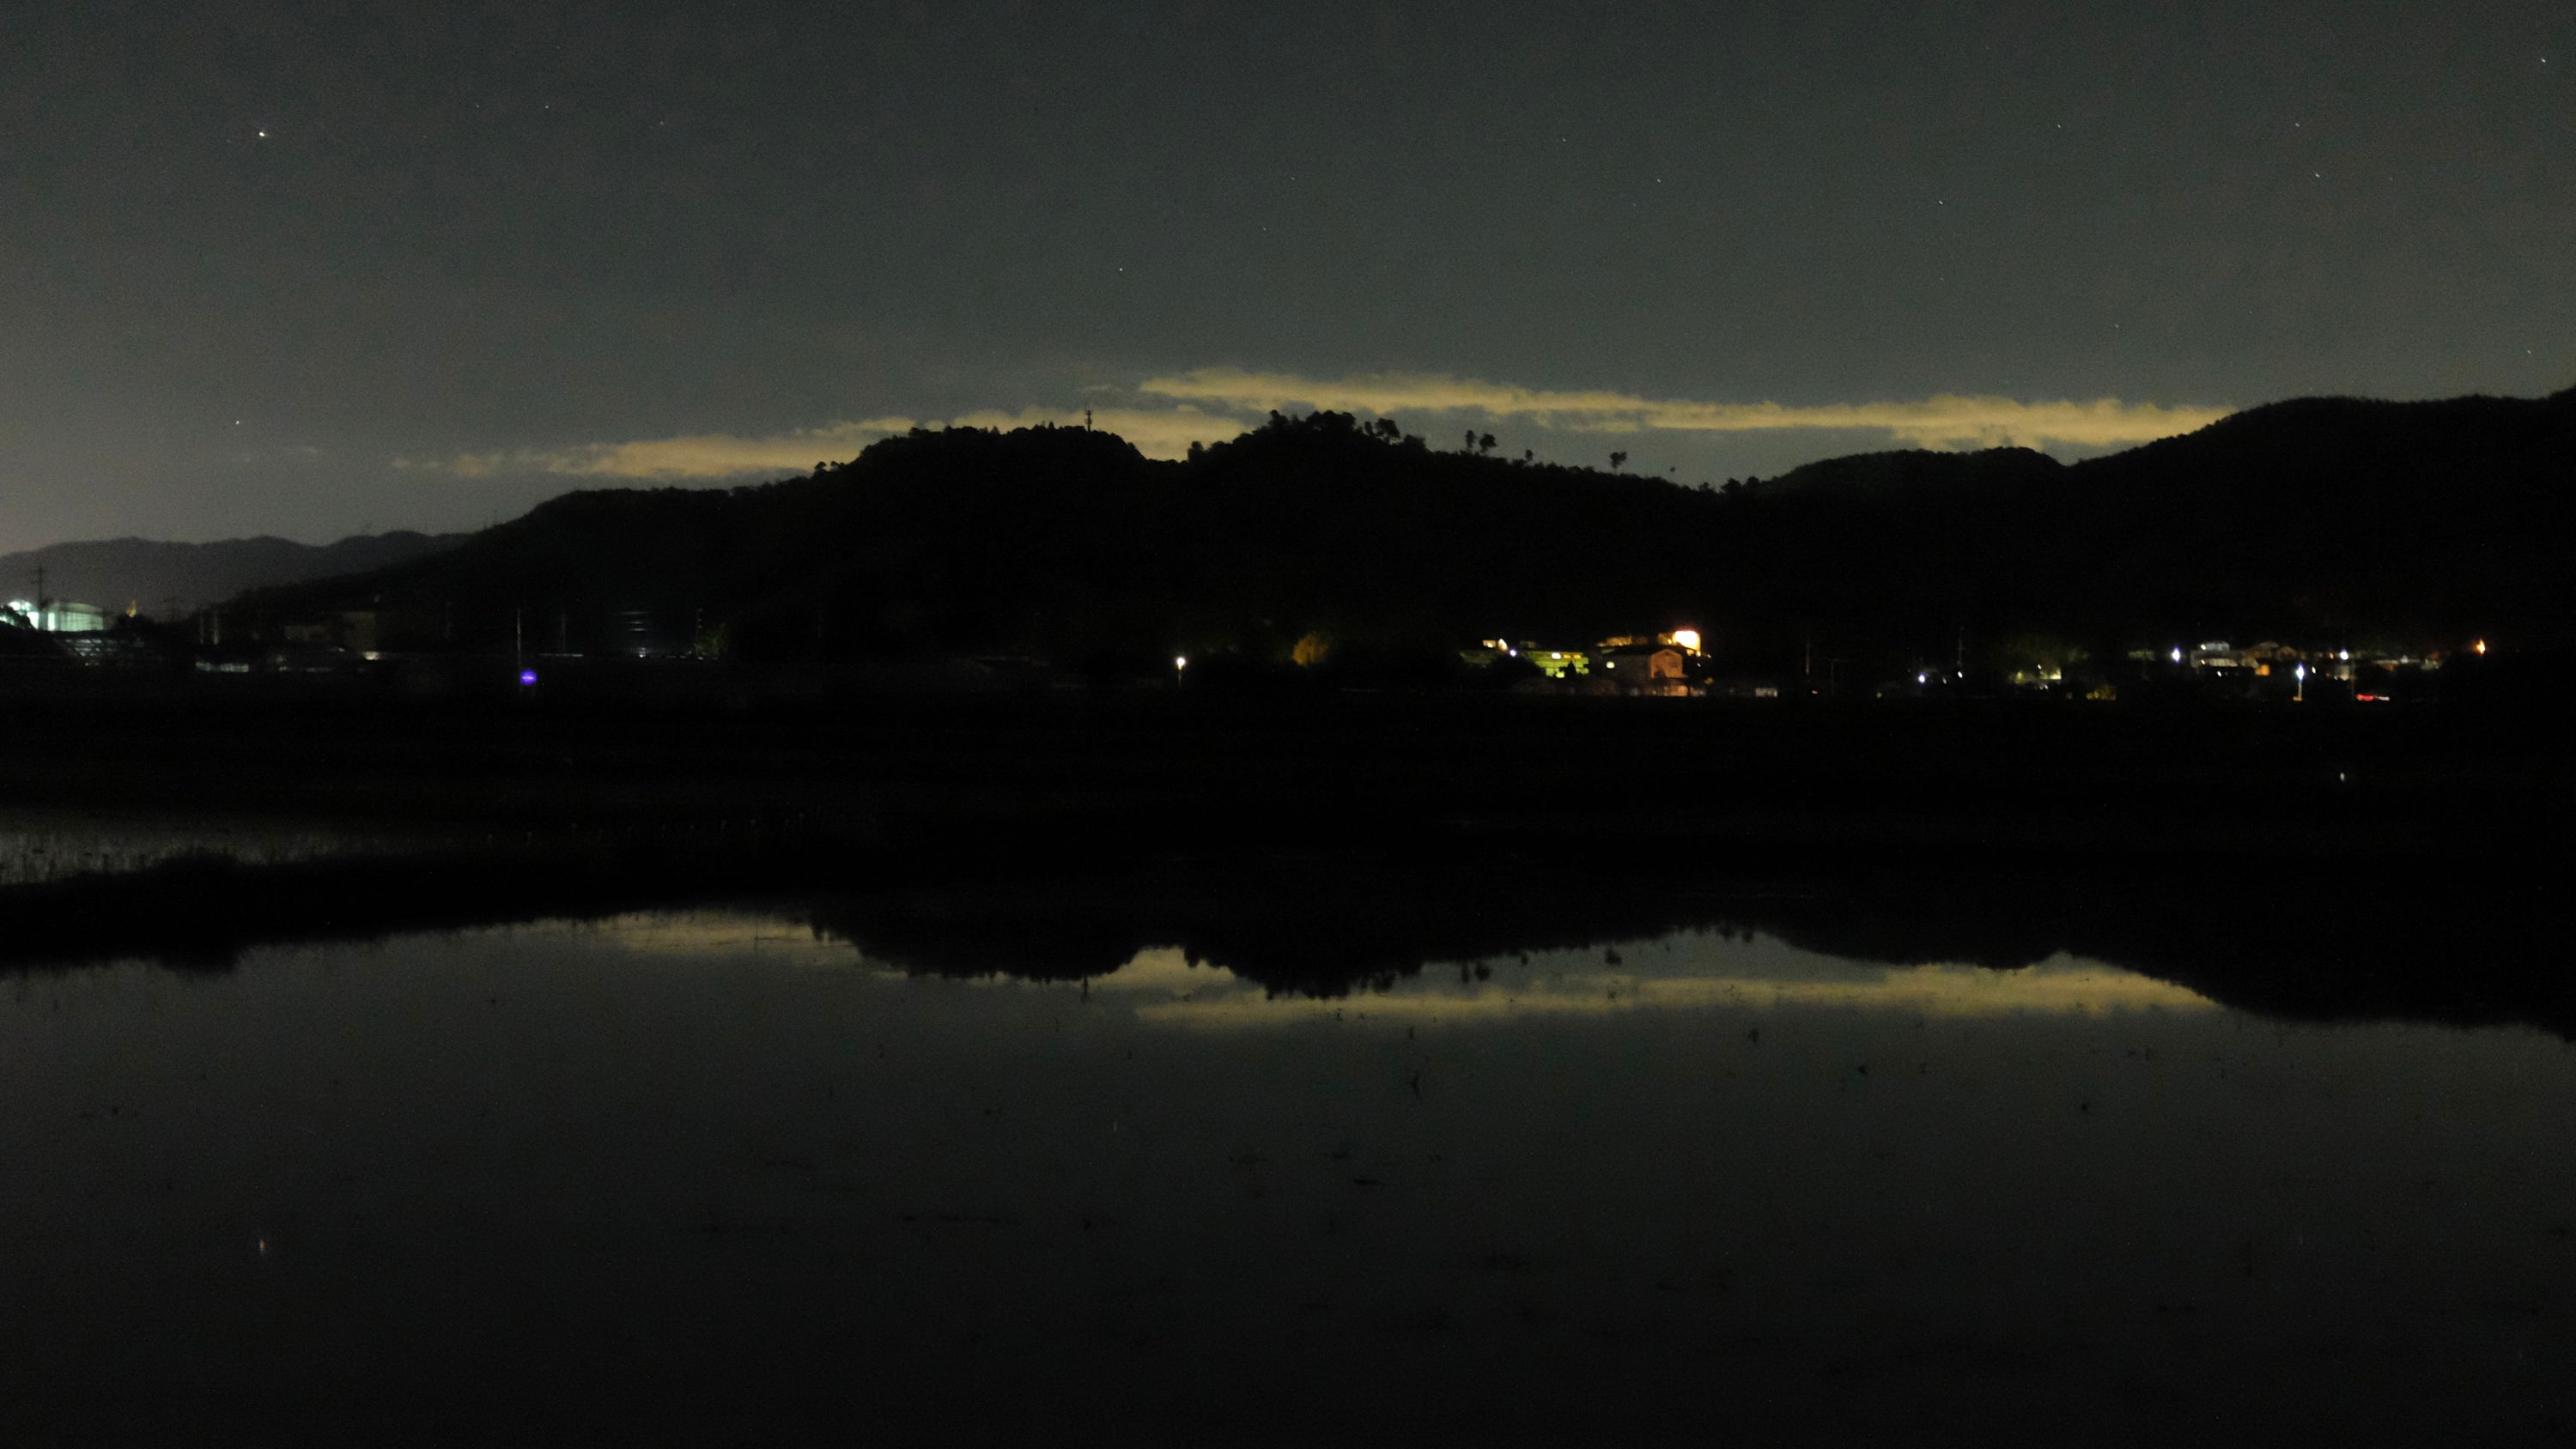 The glow of a city in the night sky is visible over low hills beyond flooded rice paddies.